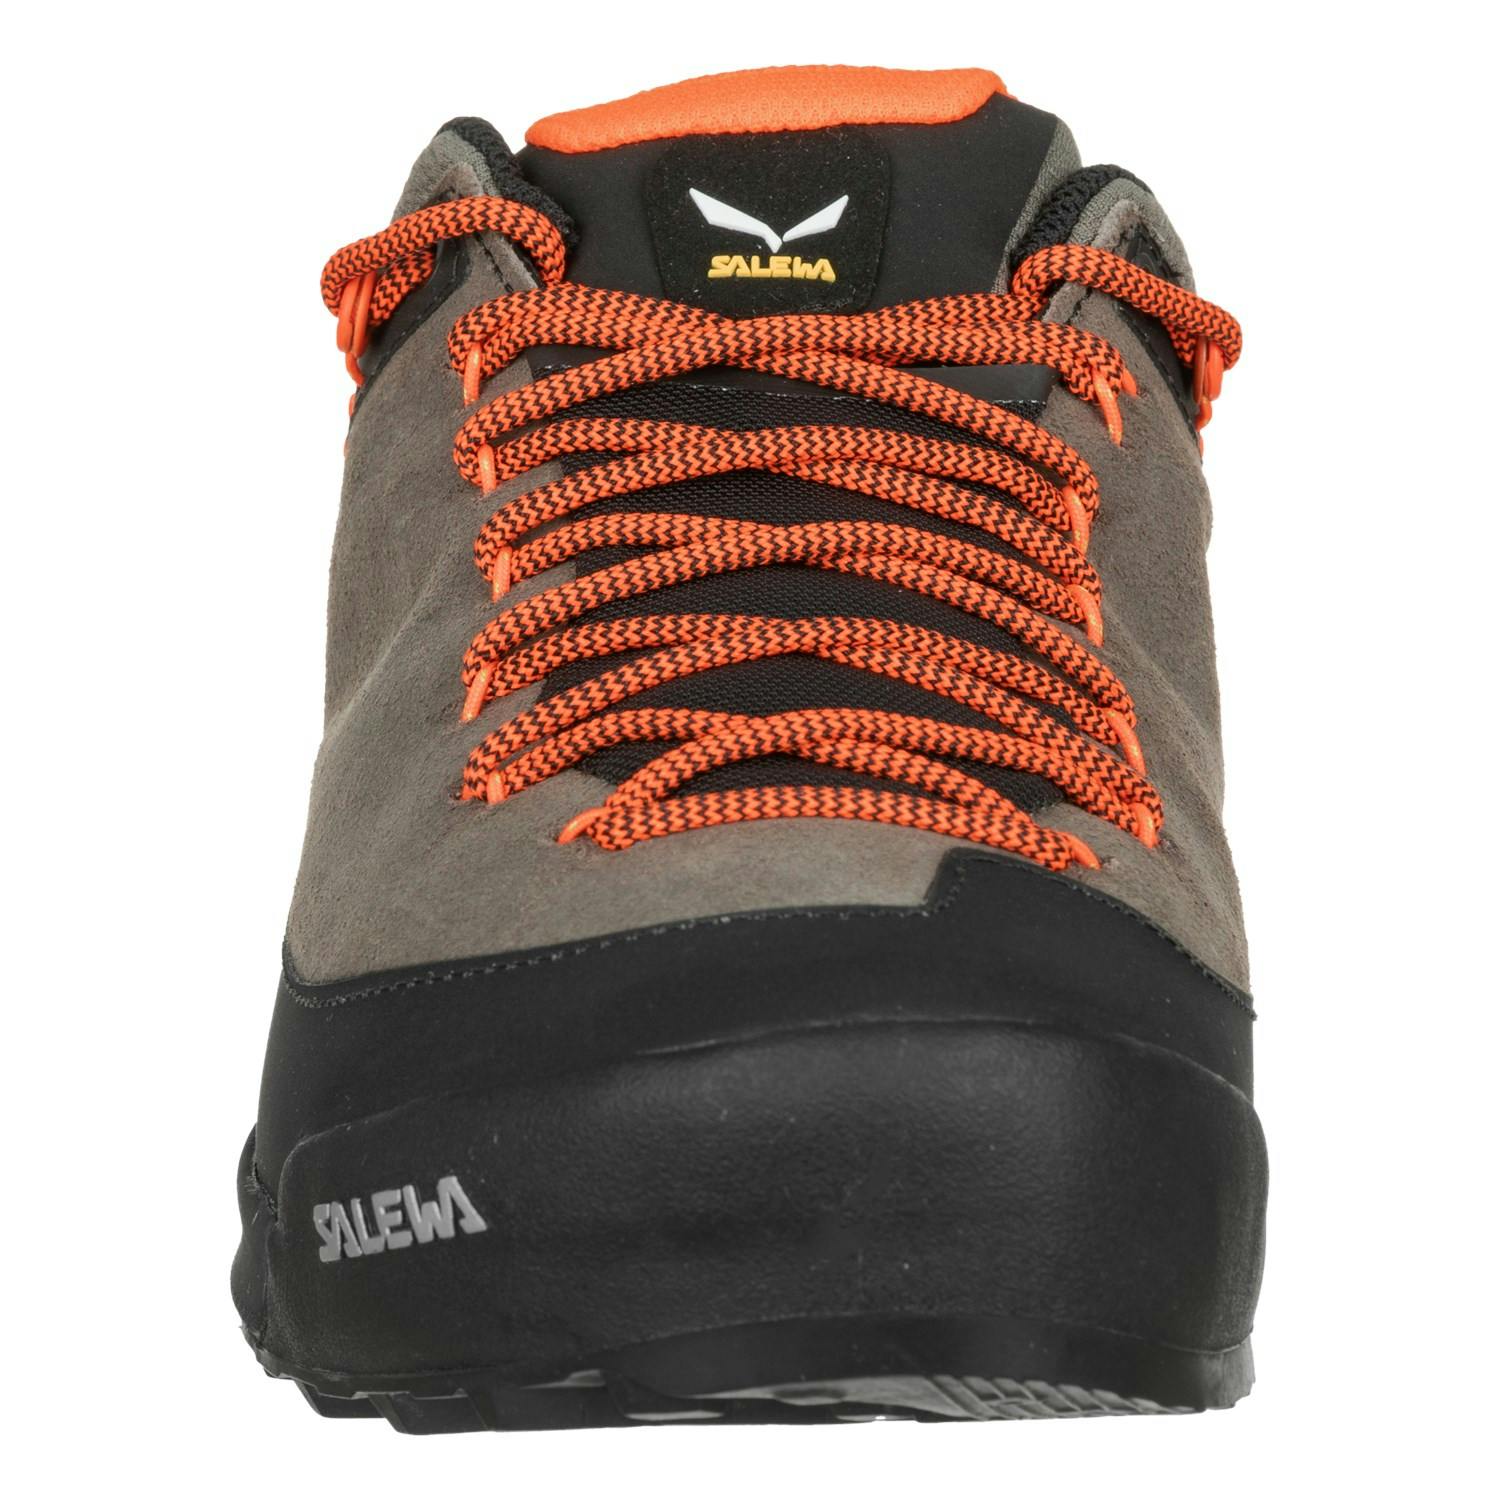 Salewa Men's Wildfire Leather Shoes